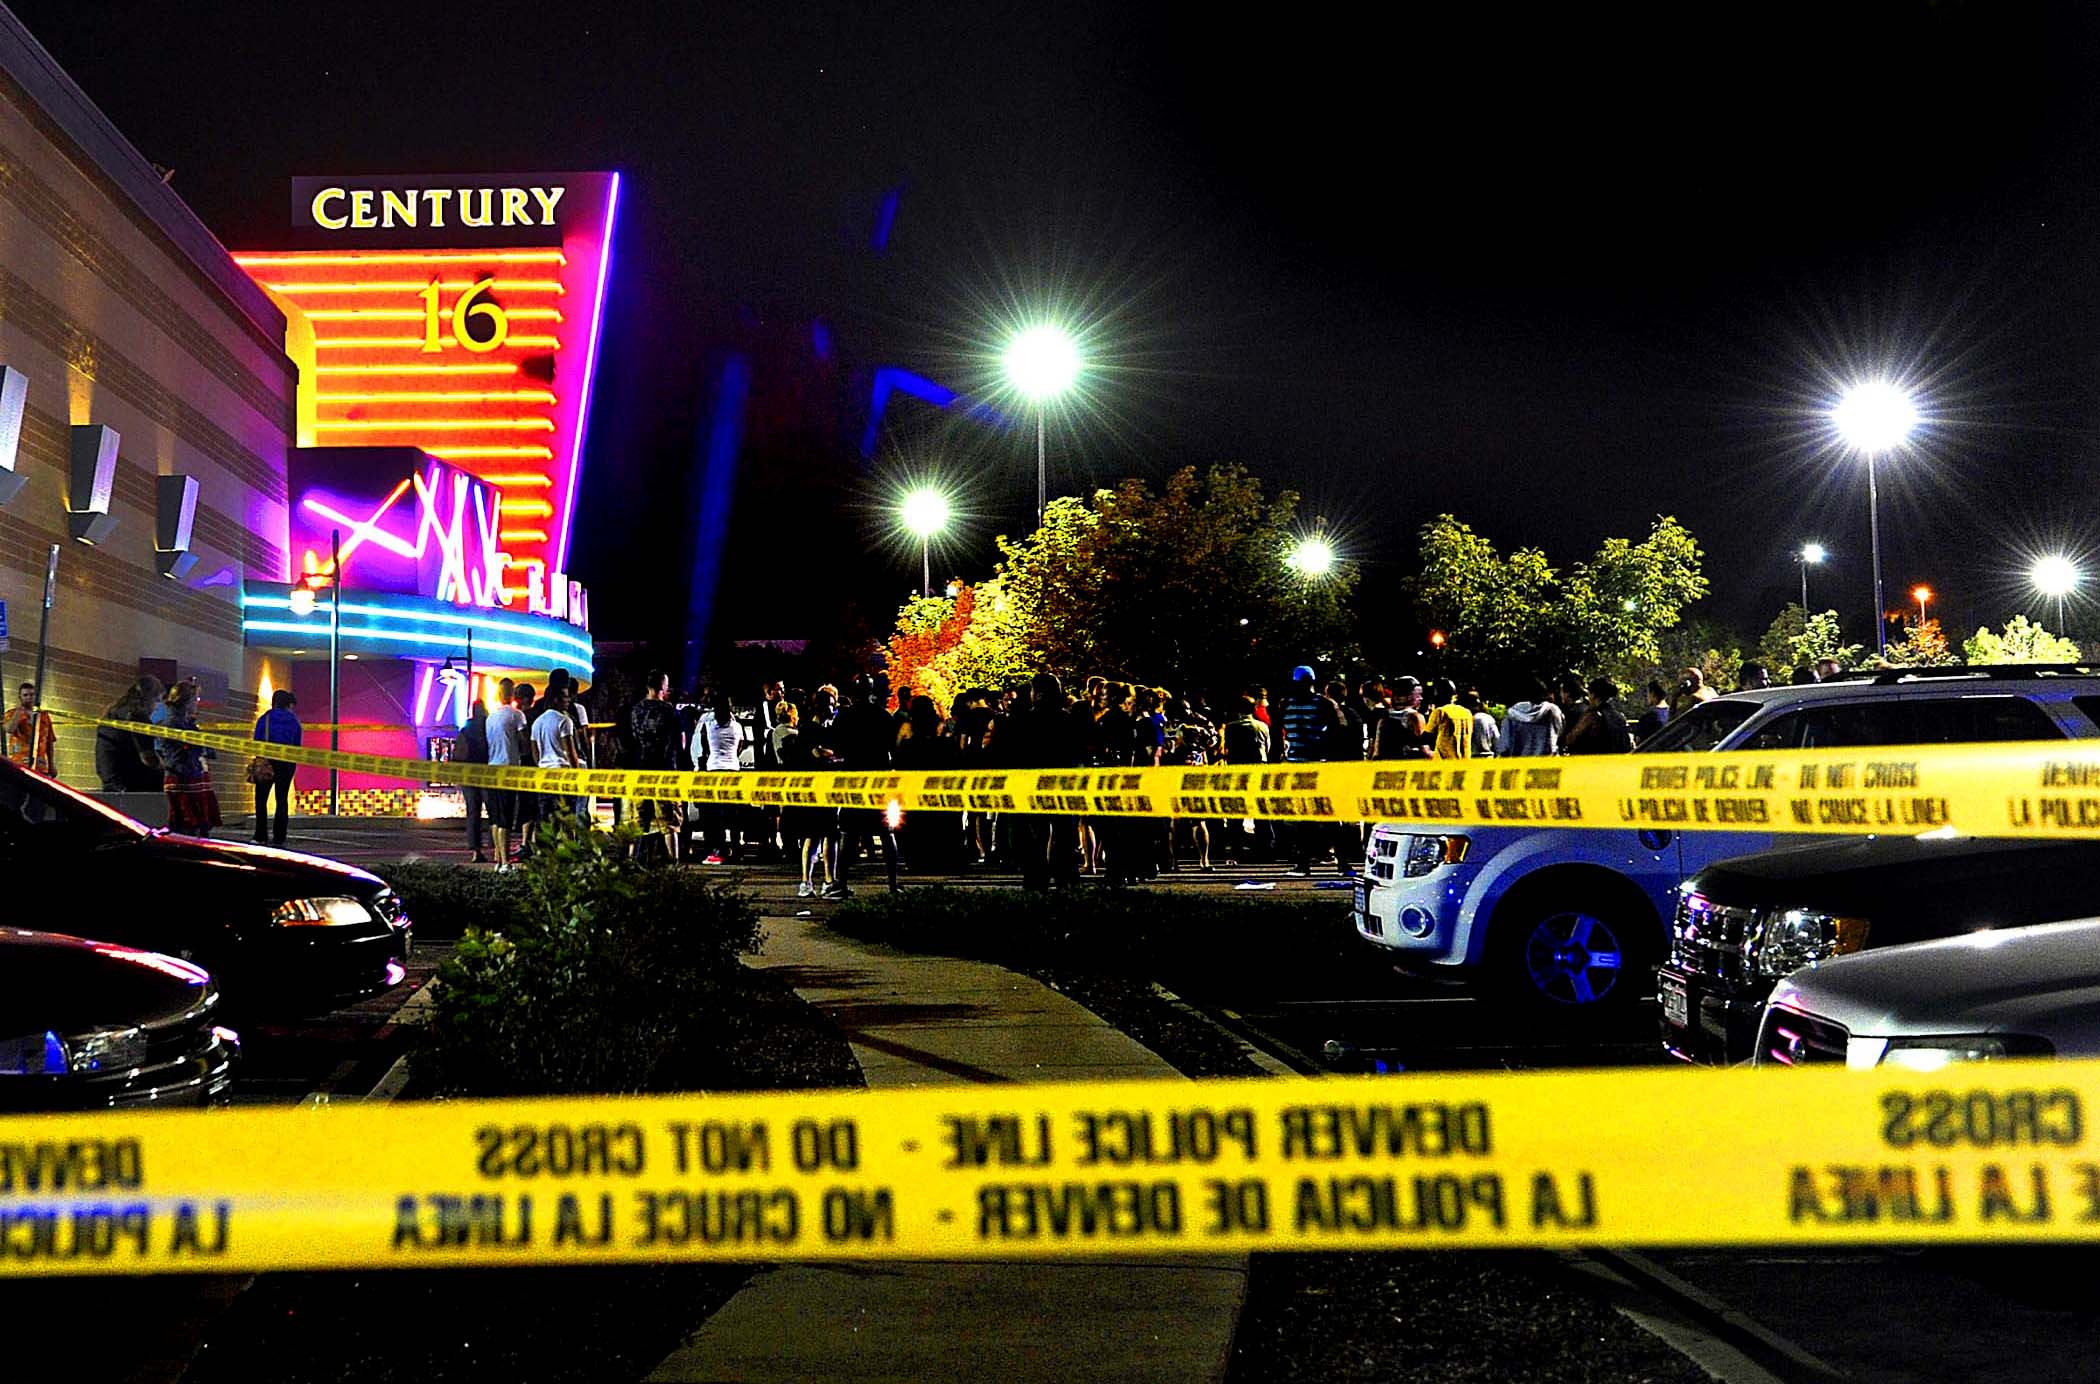 People gather outside the Century 16 movie theater in Aurora, Colorado, at the scene of the mass shooting. (Karl Gehring/Associated Press)